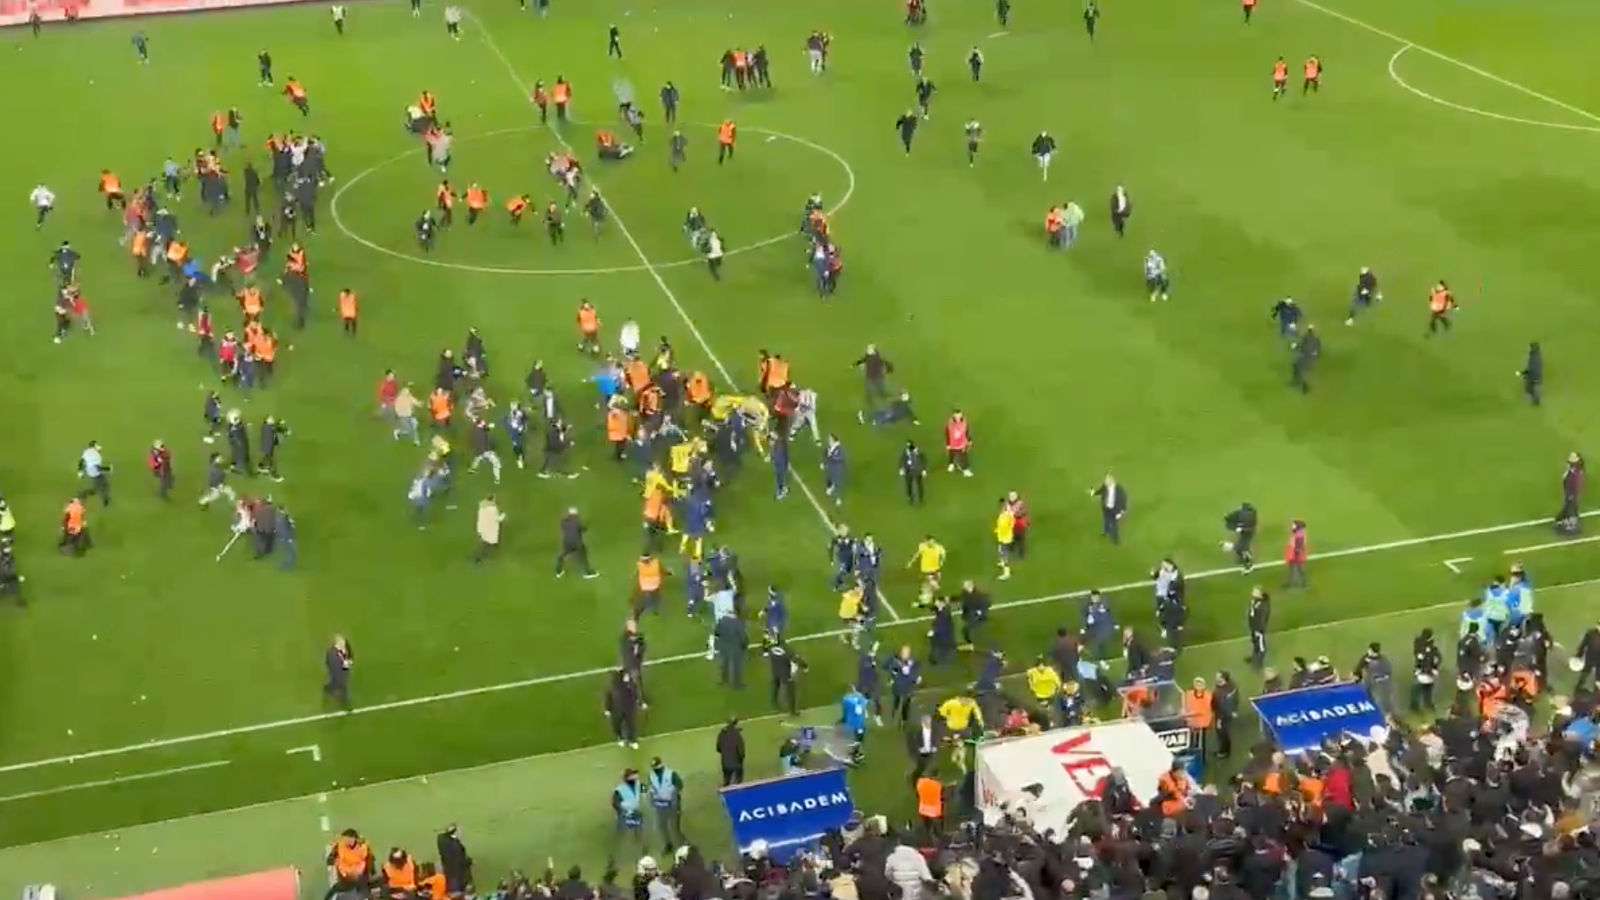 Turkish Football Fans Invade the pitch